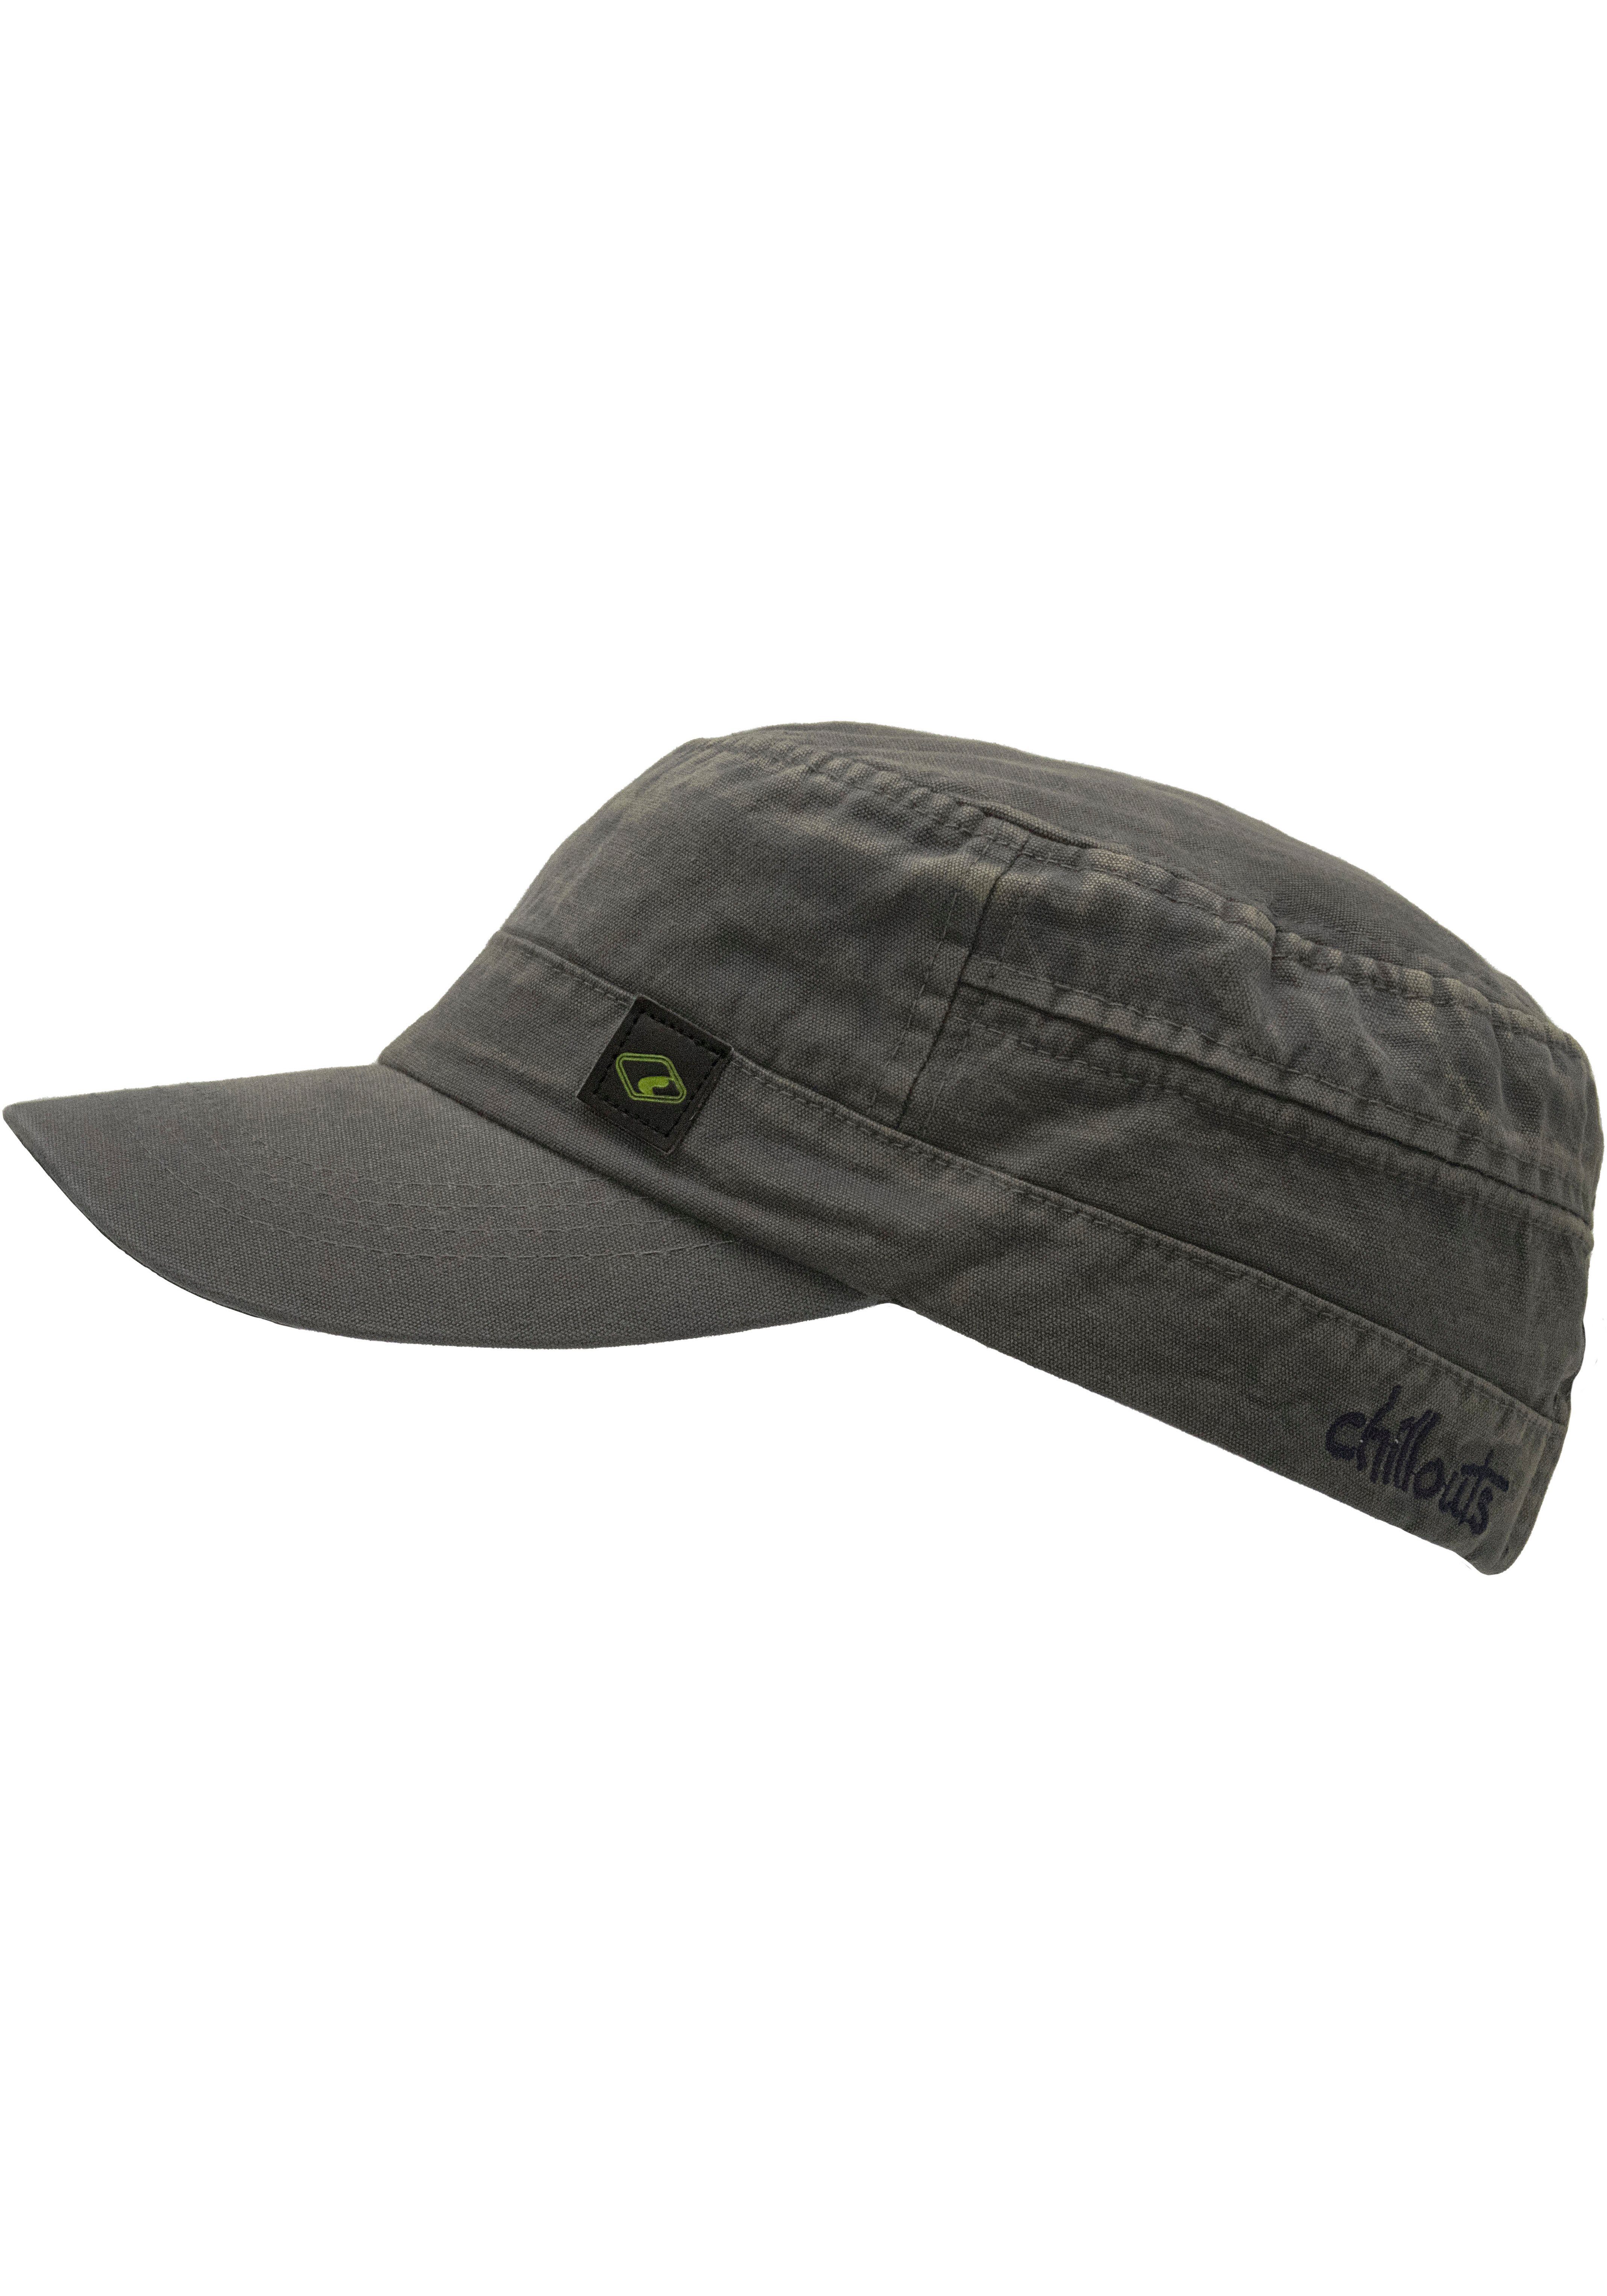 chillouts Army Cap El Paso Hat aus reiner Baumwolle, atmungsaktiv, One Size washed grey